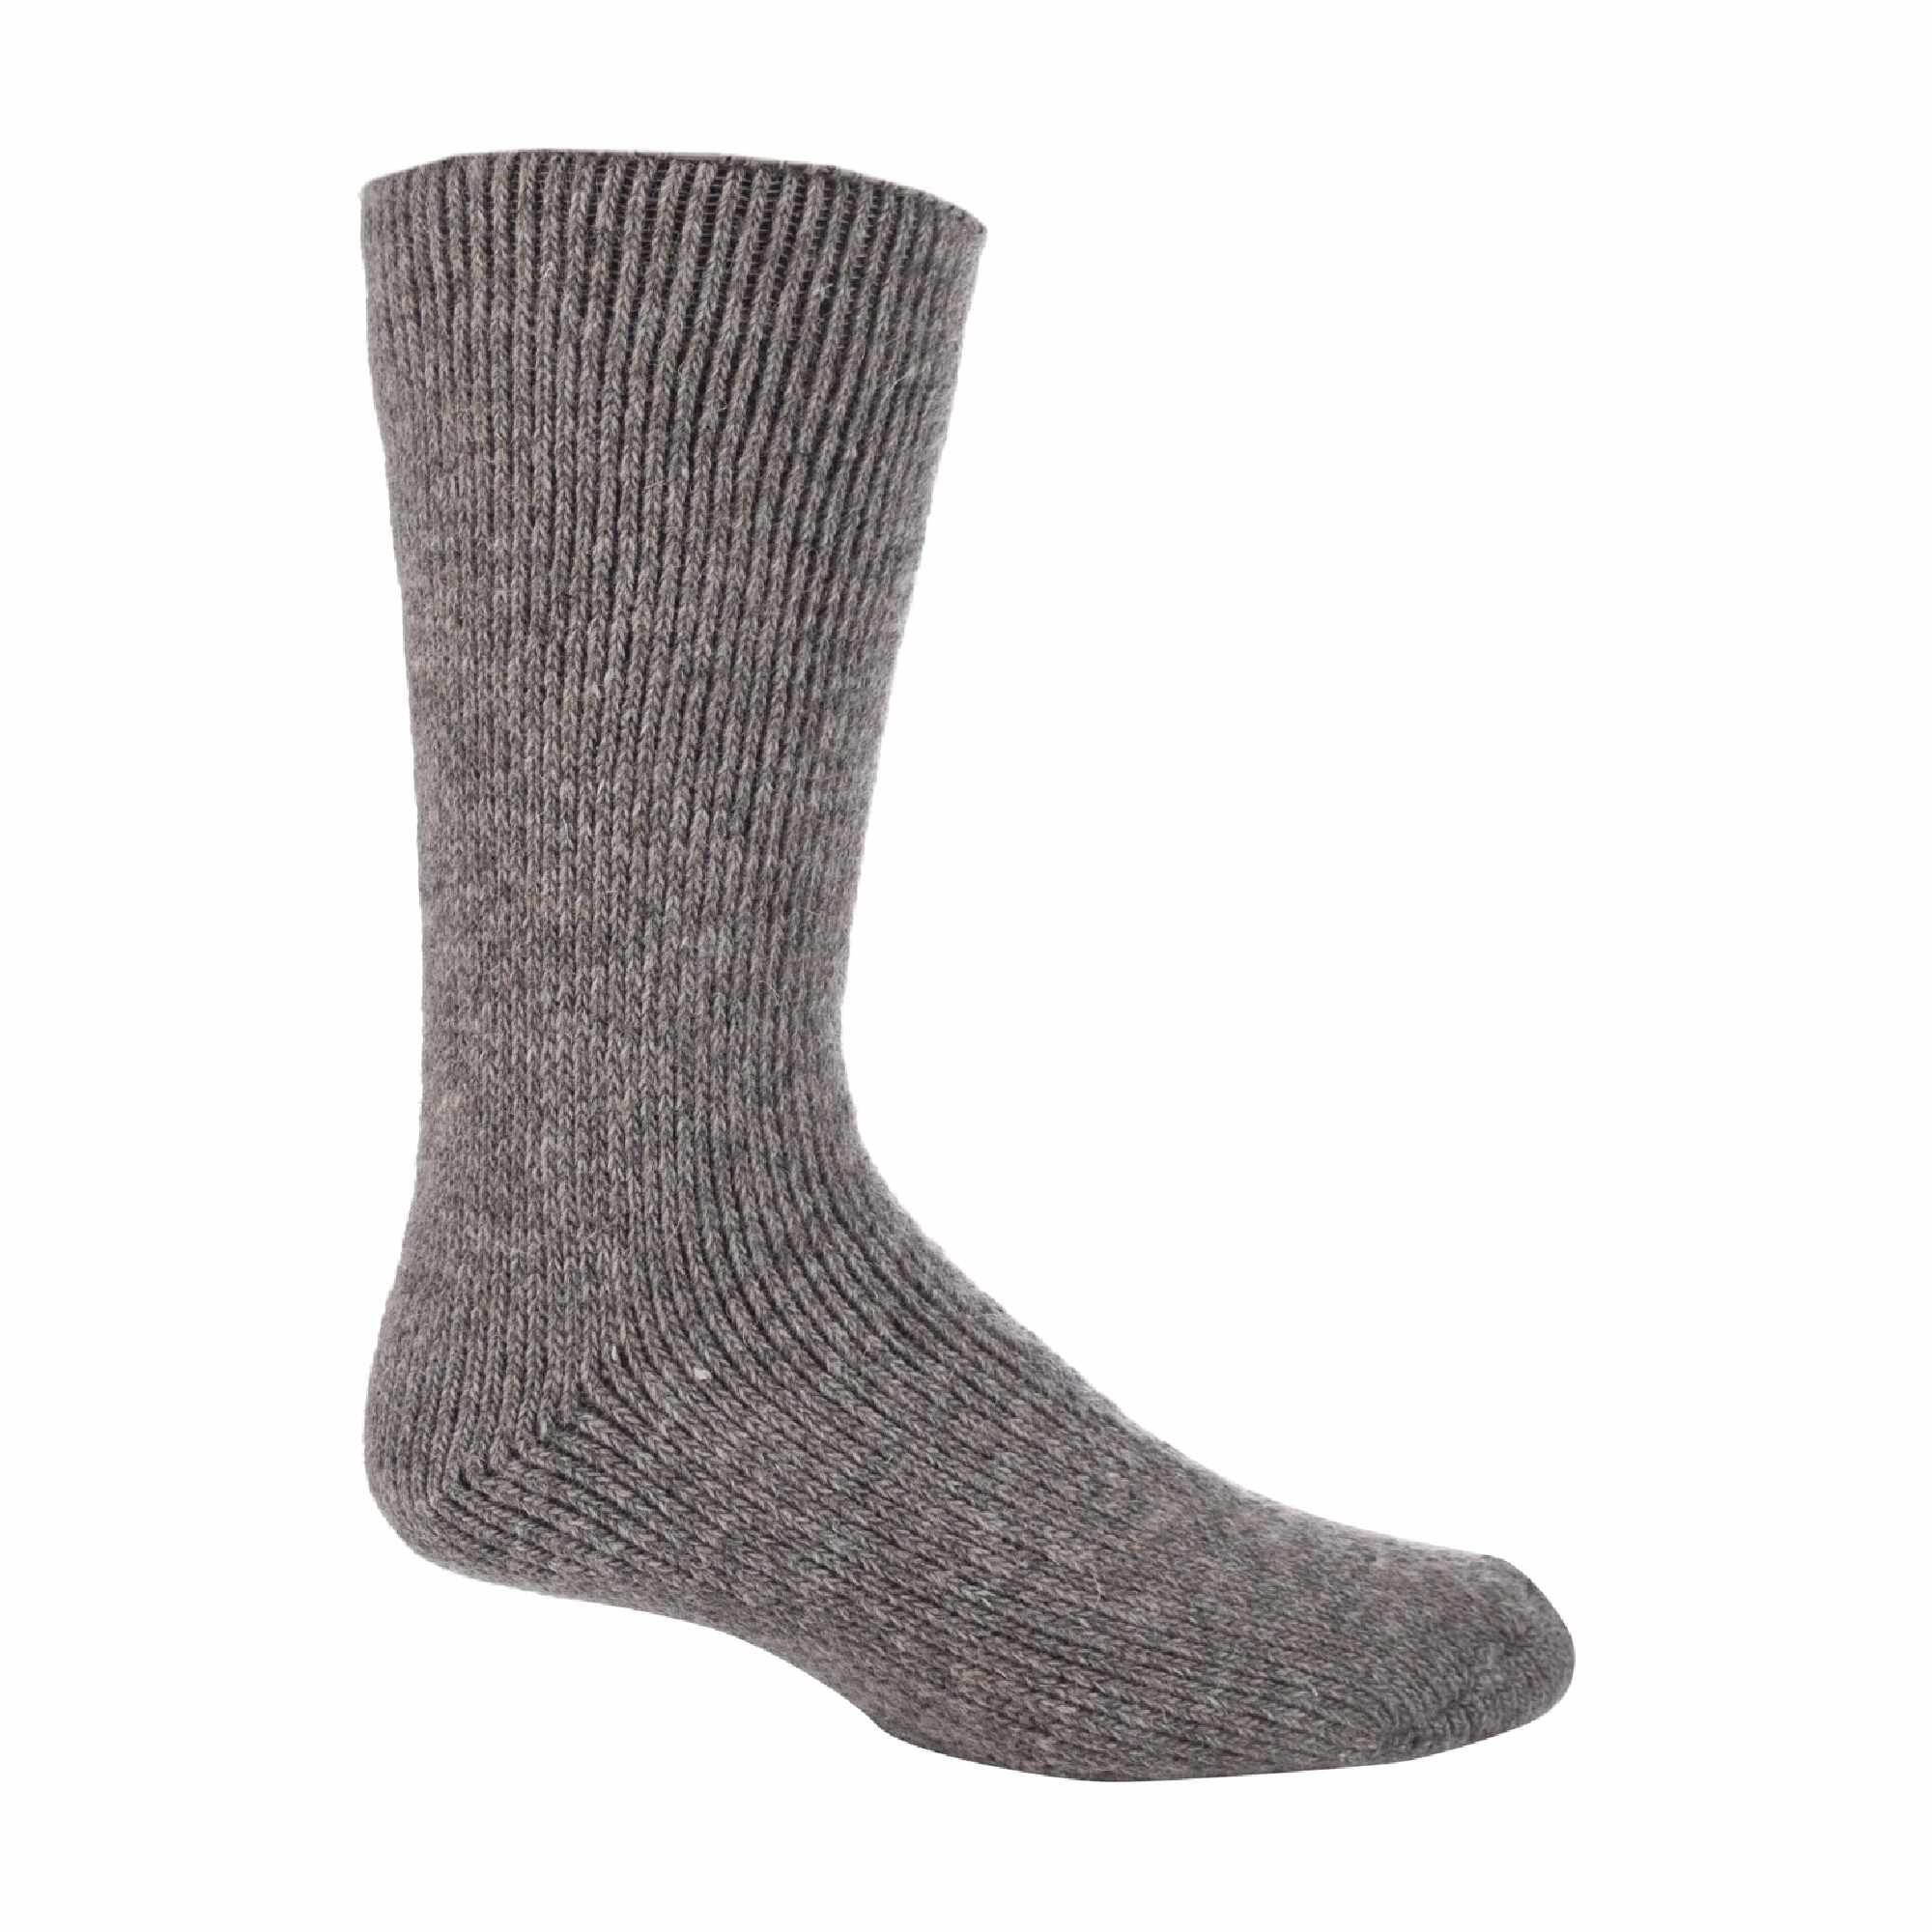 HEAT HOLDERS Mens Thick Heavy 2.7 TOG Short Thermal Wool Rich Socks